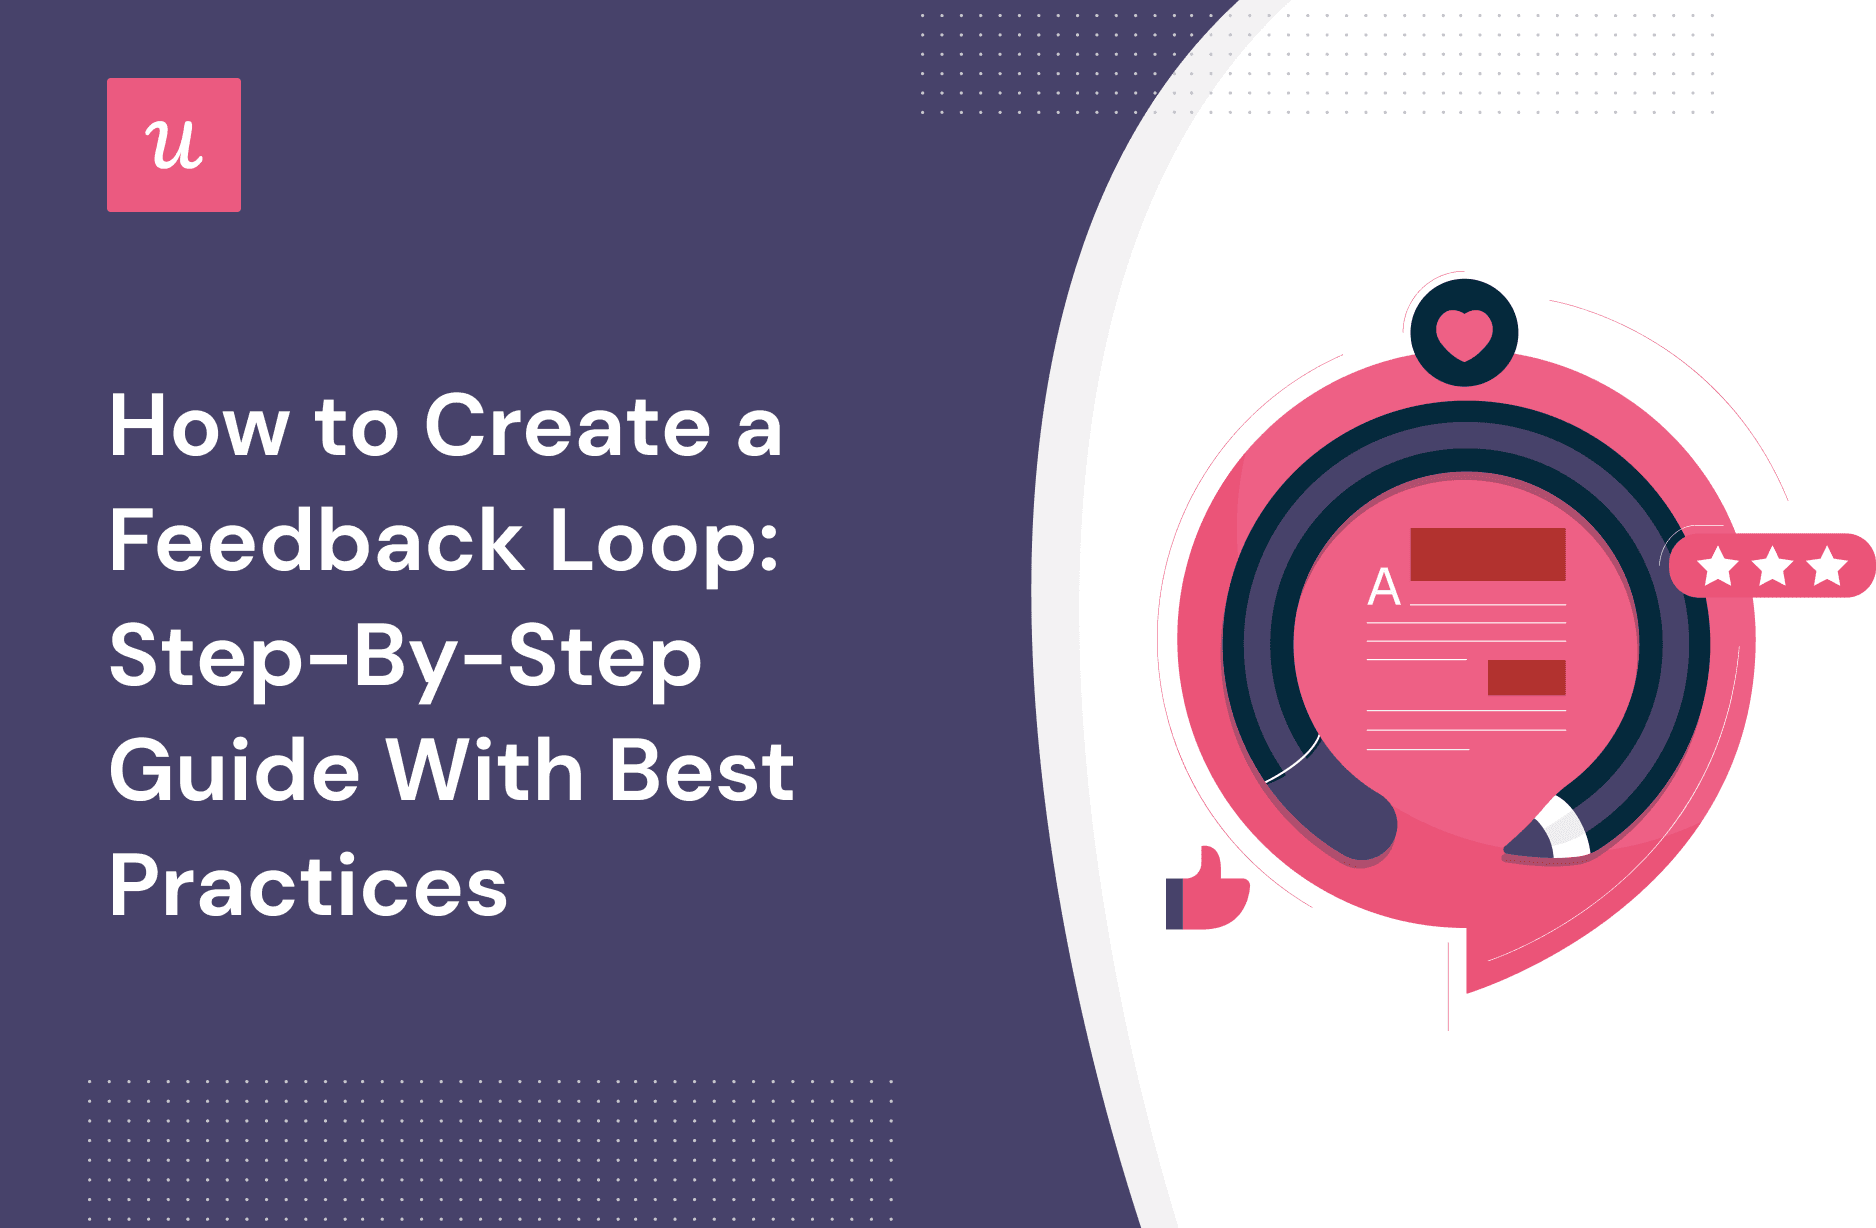 How to Create a Feedback Loop: Step-By-Step Guide With Best Practices cover